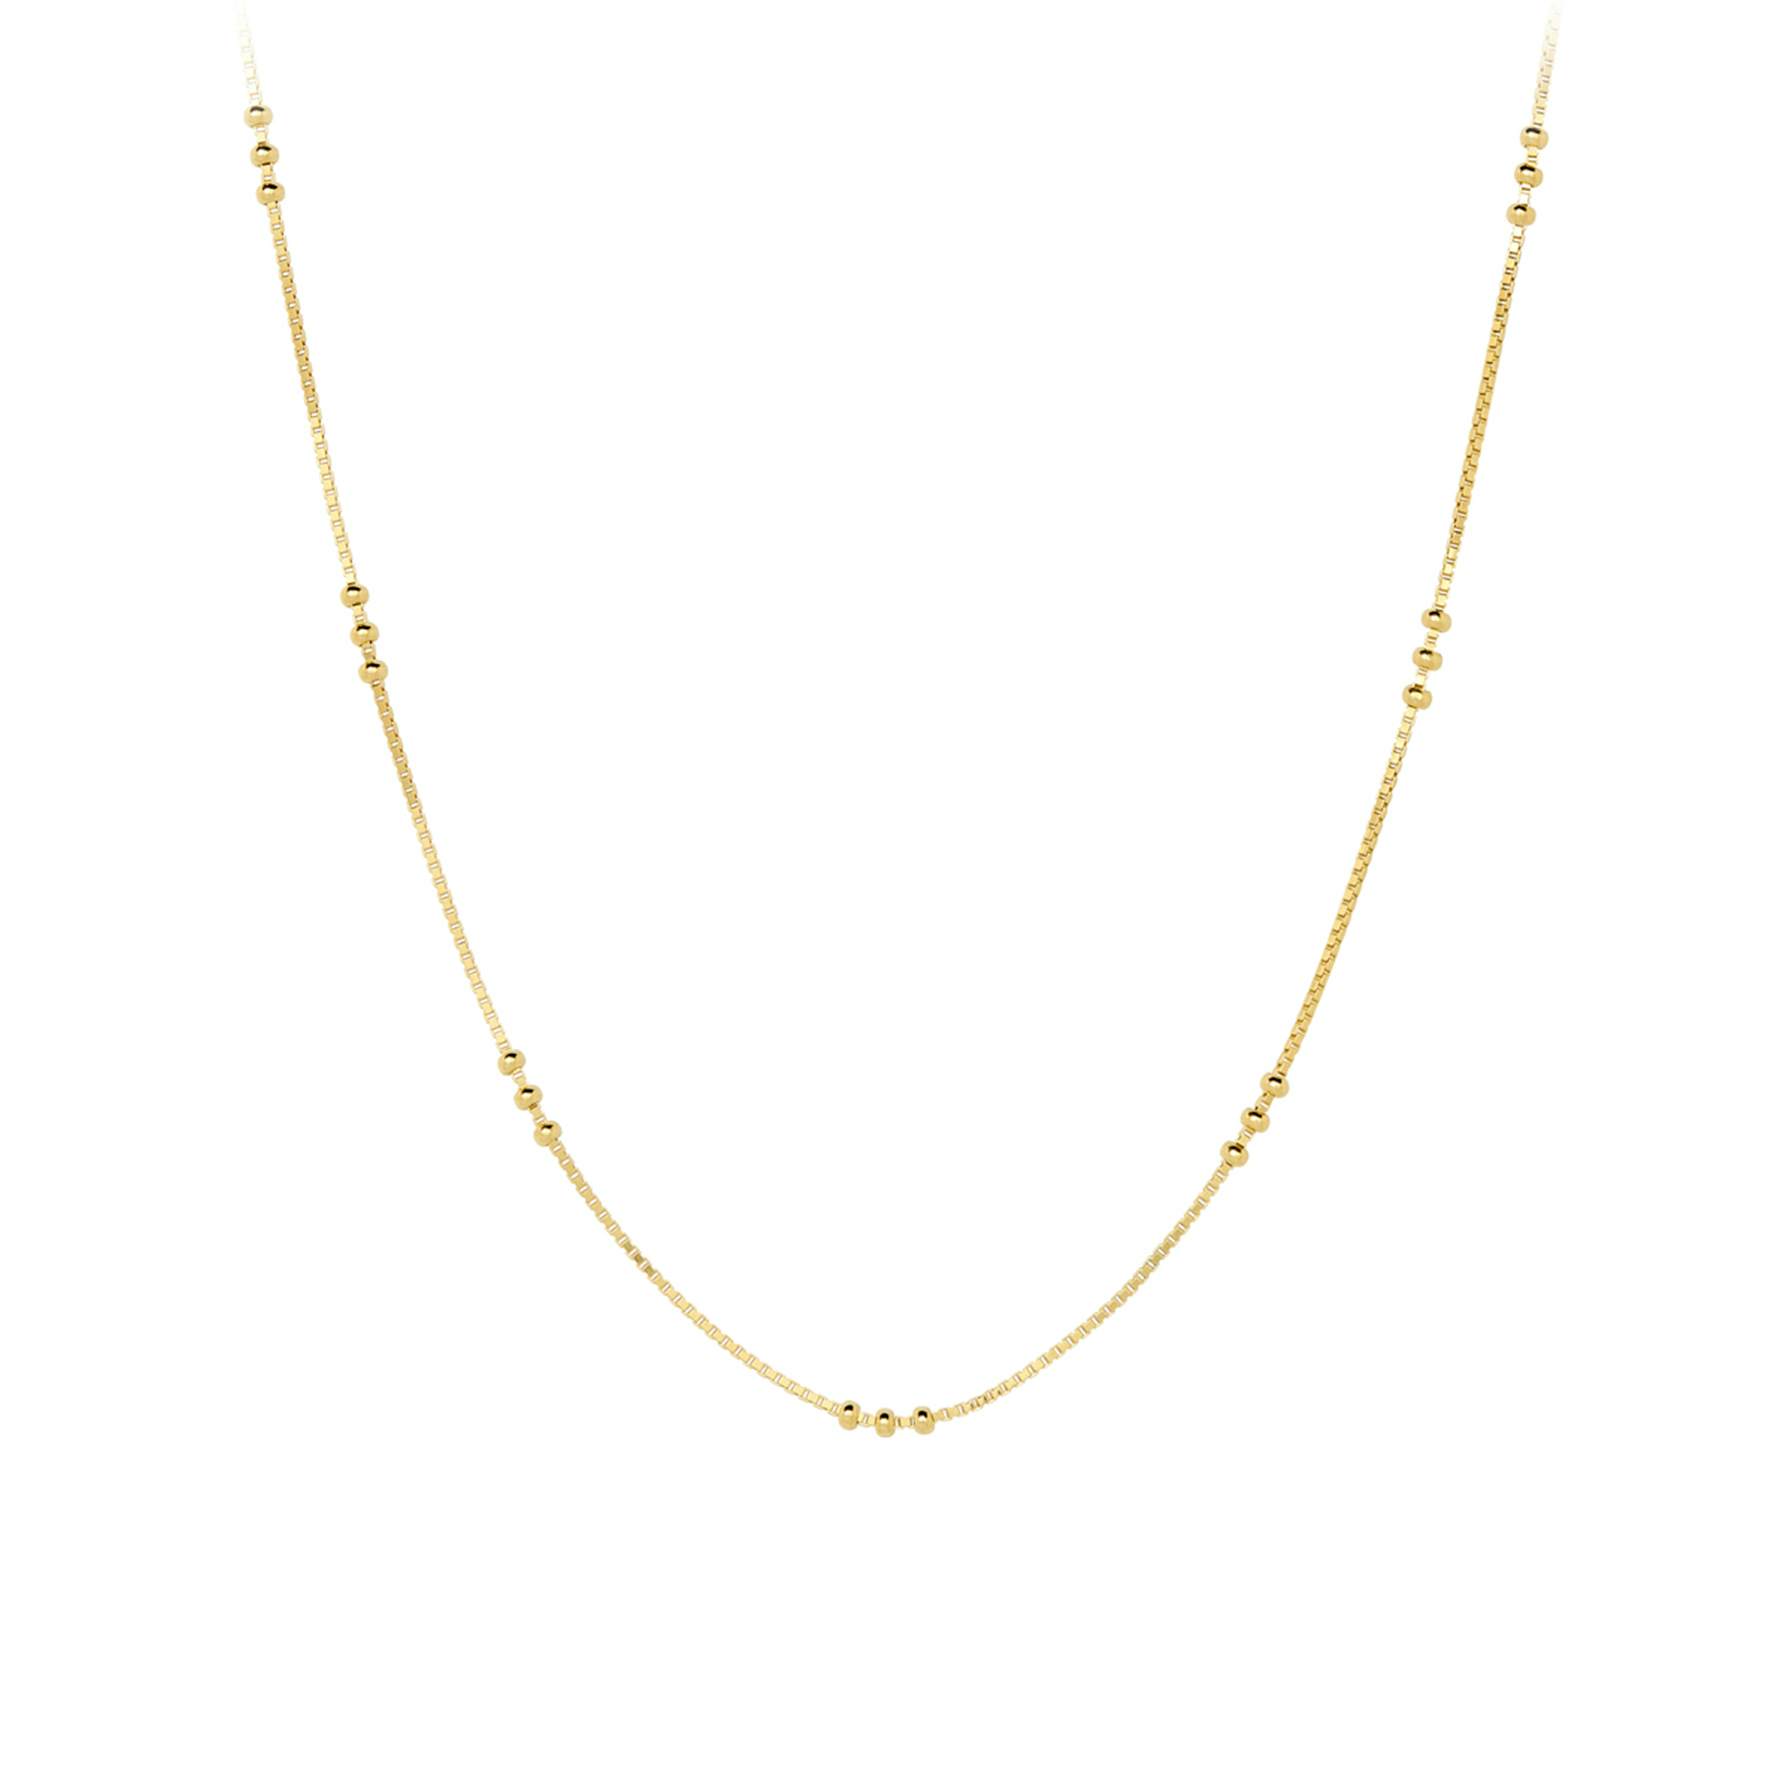 Eva Necklace from Pernille Corydon in Goldplated-Silver Sterling 925